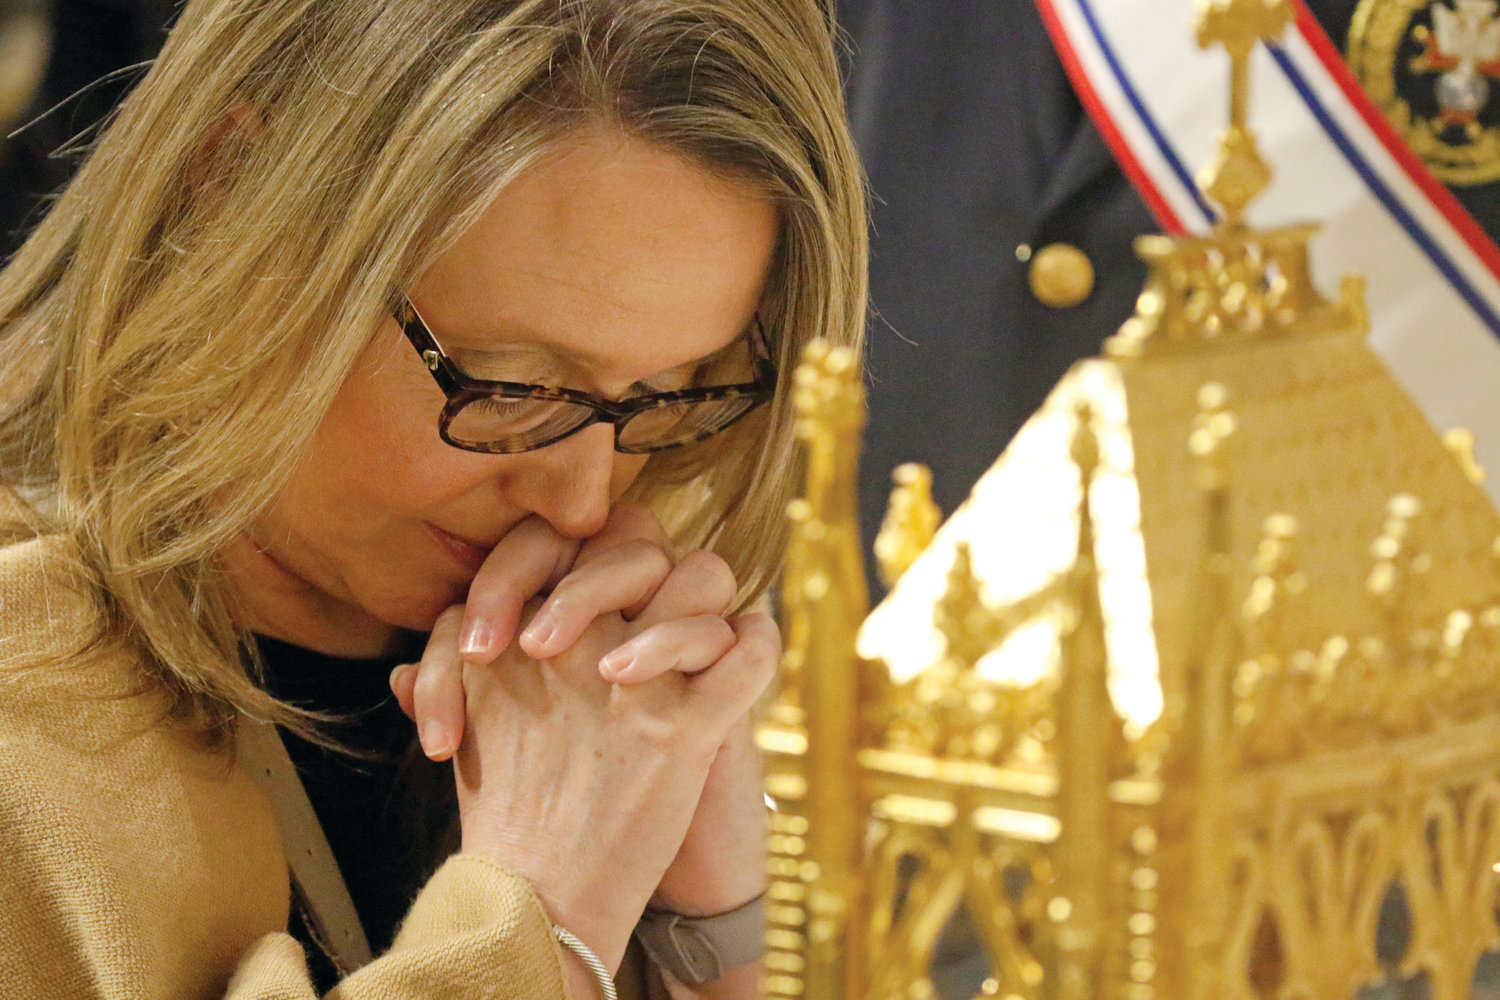 PRAYERFUL OPPORTUNITY COMES TO PROVIDENCE: A woman kneels in prayer as she venerates St. John Vianney’s incorrupt heart at St. Patrick’s Cathedral in New York City April 7, 2019. The relic of the 19th-century French priest and patron of parish priests is on a six-month Knights of Columbus-sponsored tour of the U.S.